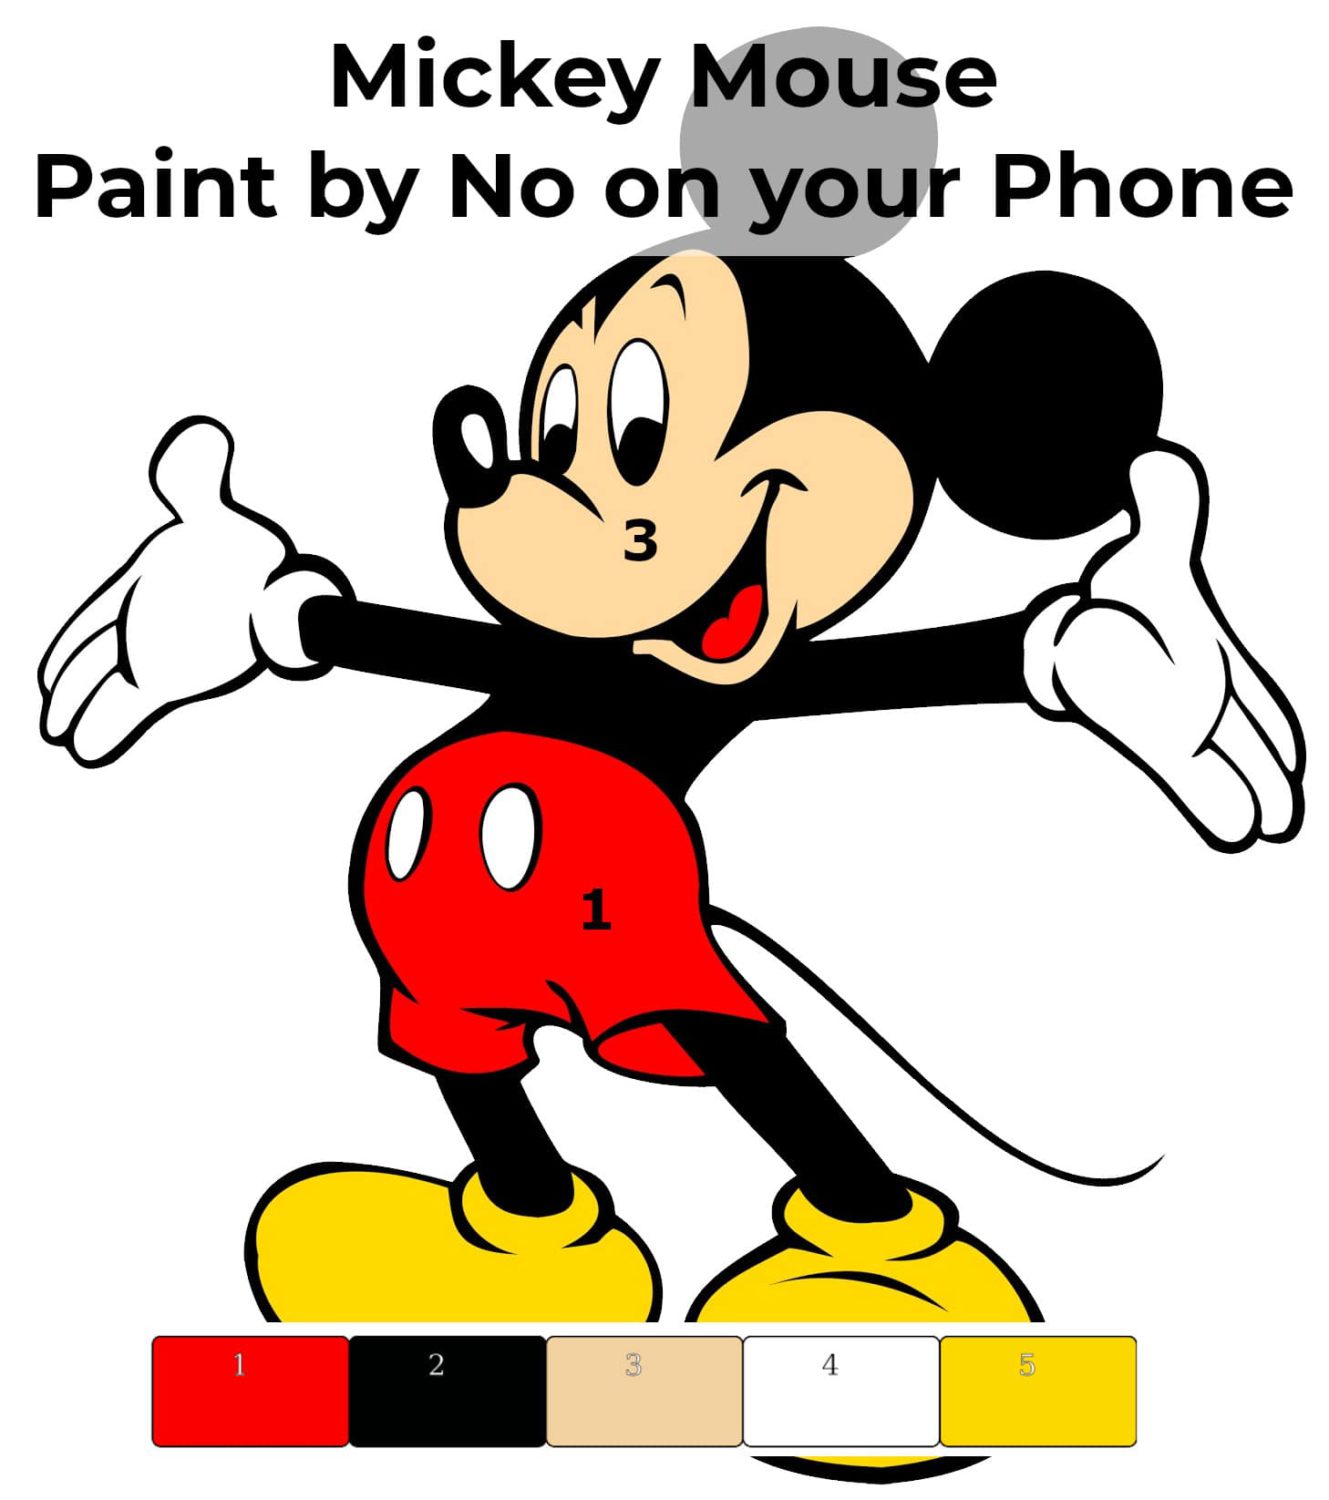 pbyno - mickey mouse - featured